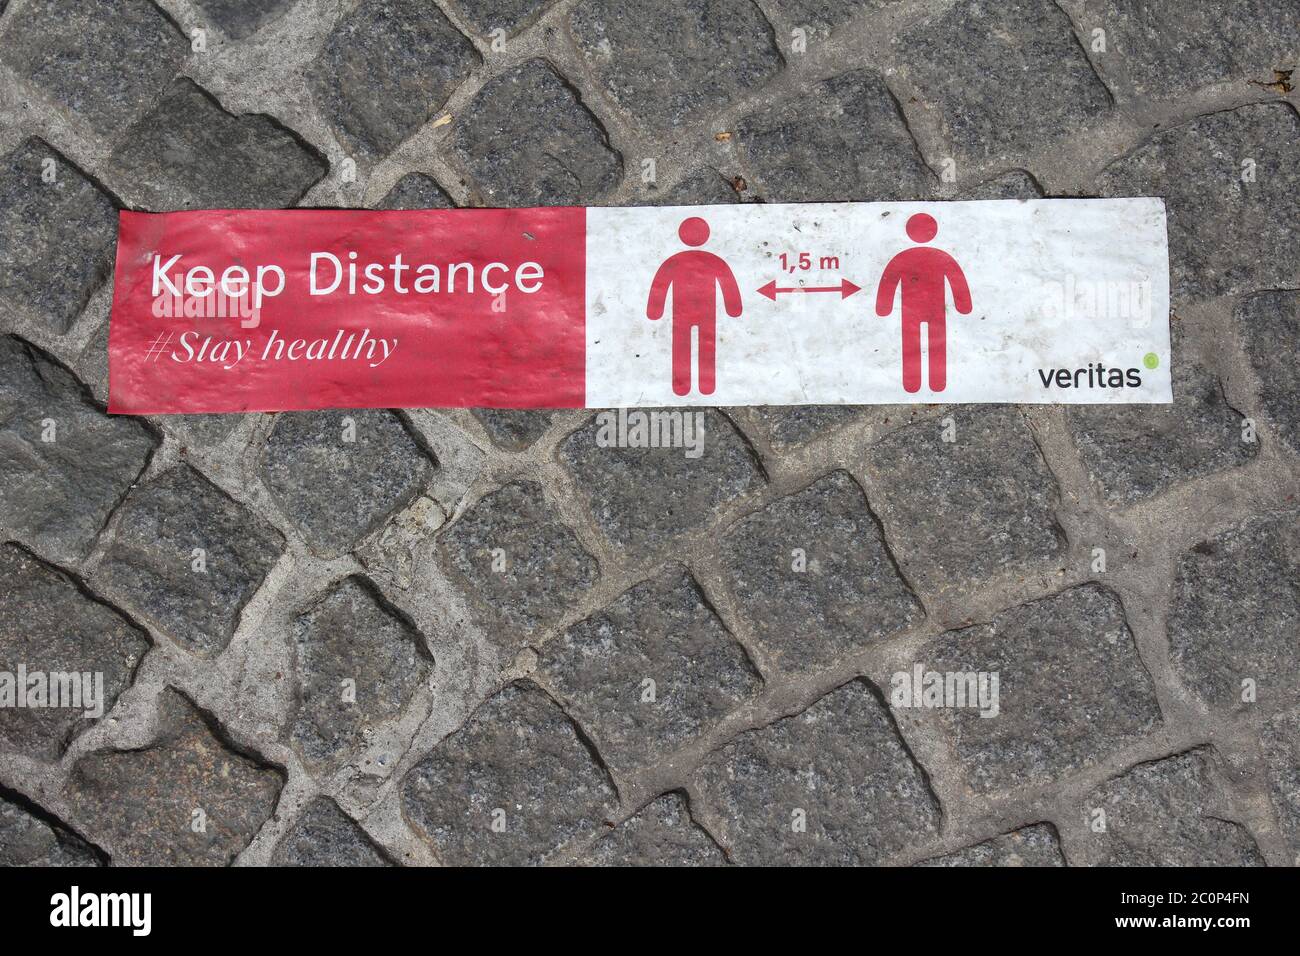 Aalst Belgium 12 June 2020 Social Distancing Advise On A Pavement Outside A Shop In The Main Town Centre Shopping Street Of Aalst Regulations Have Stock Photo Alamy